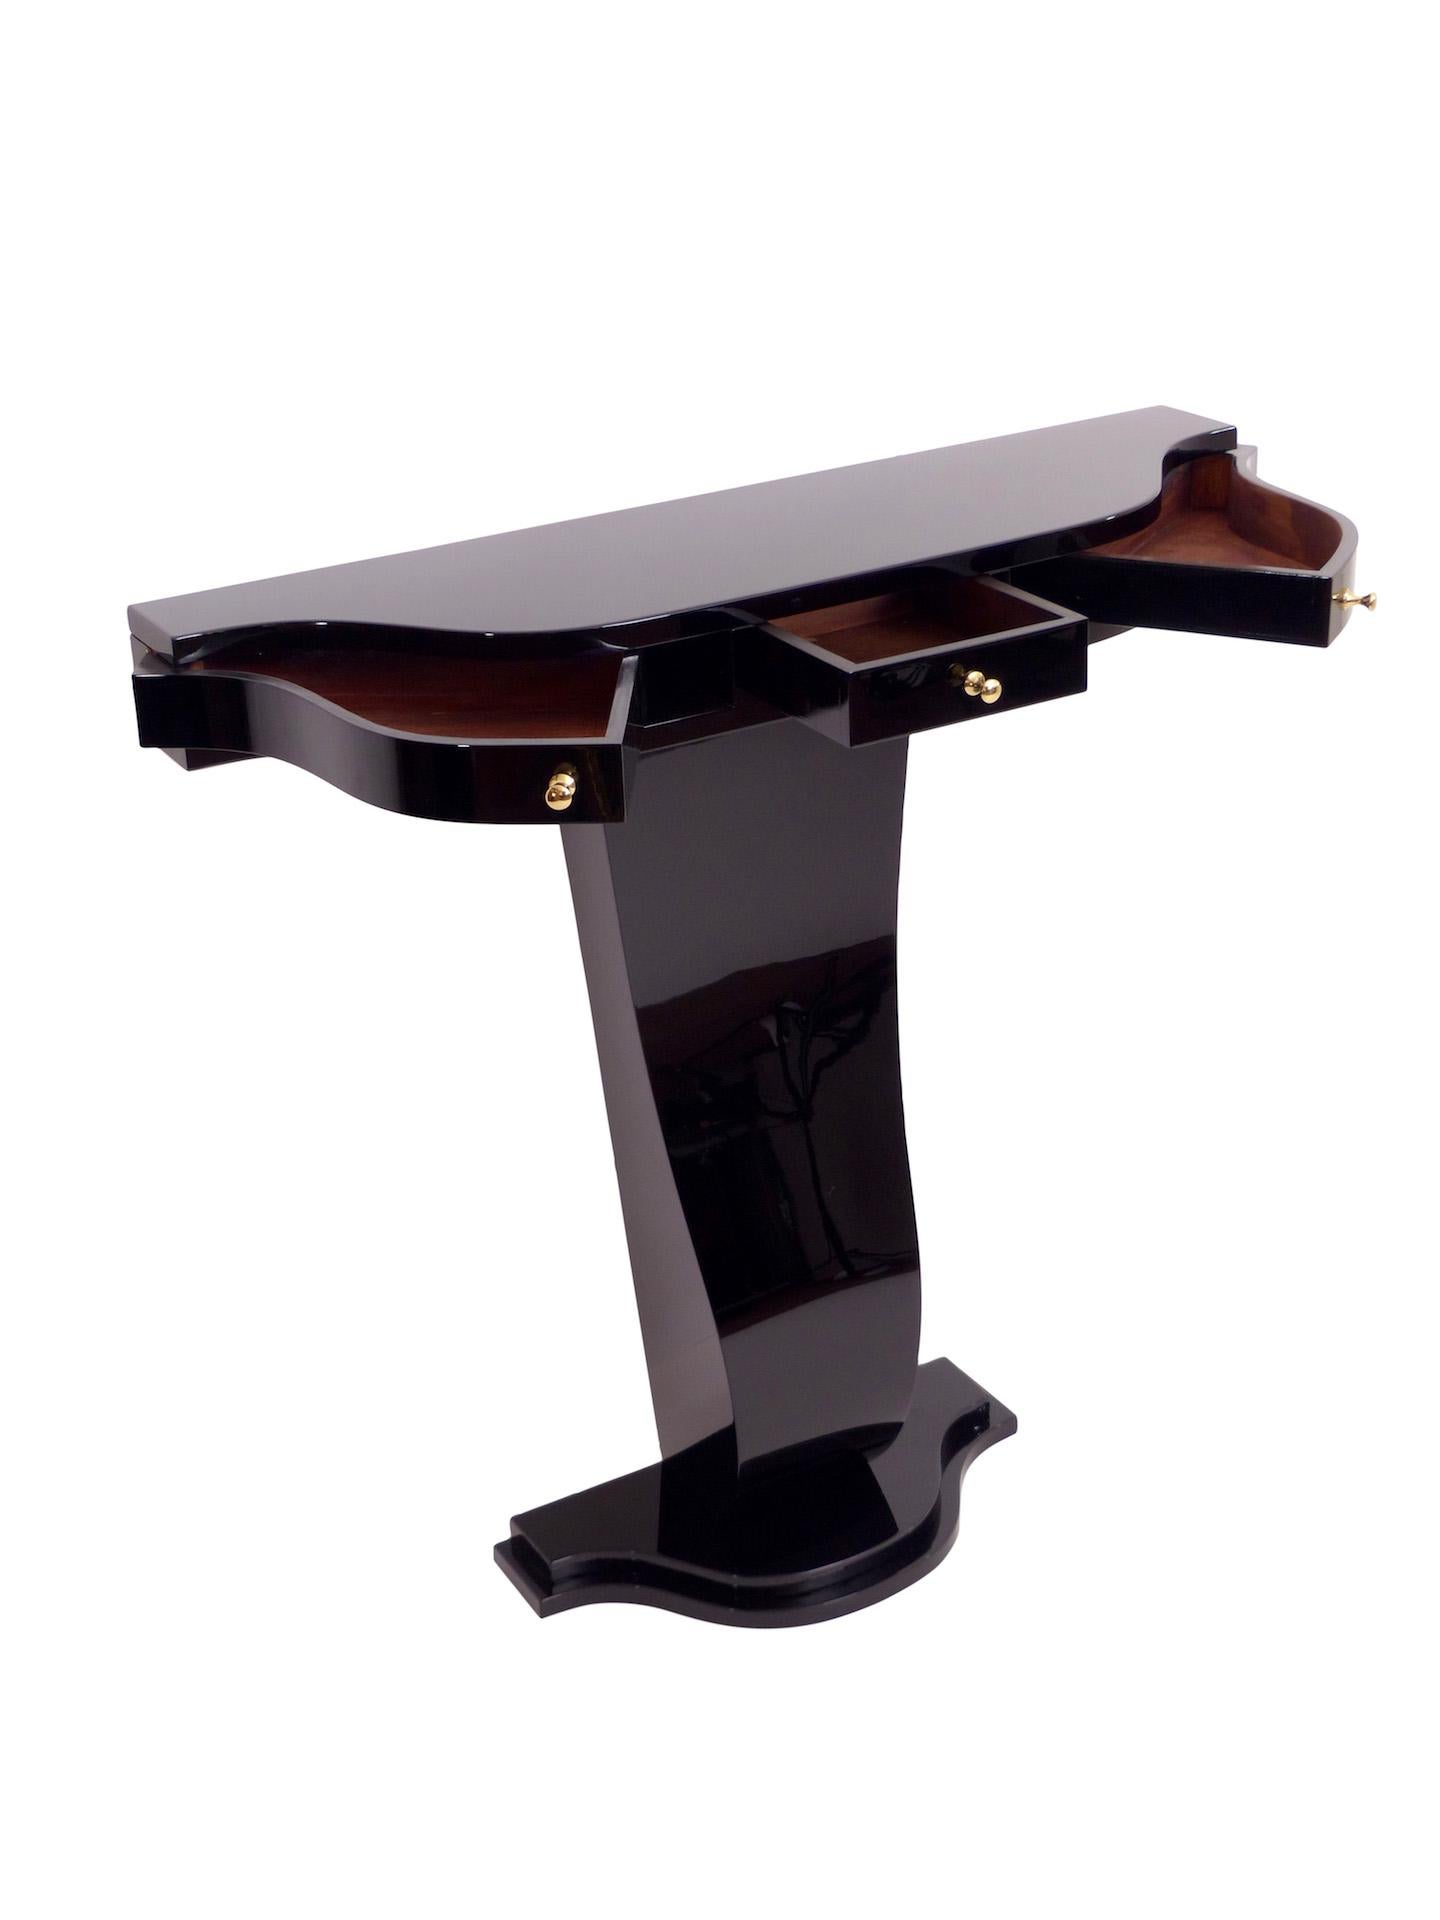 Blackened Little Art Deco Style Console Table in Black Piano Lacquer Made in Germany For Sale